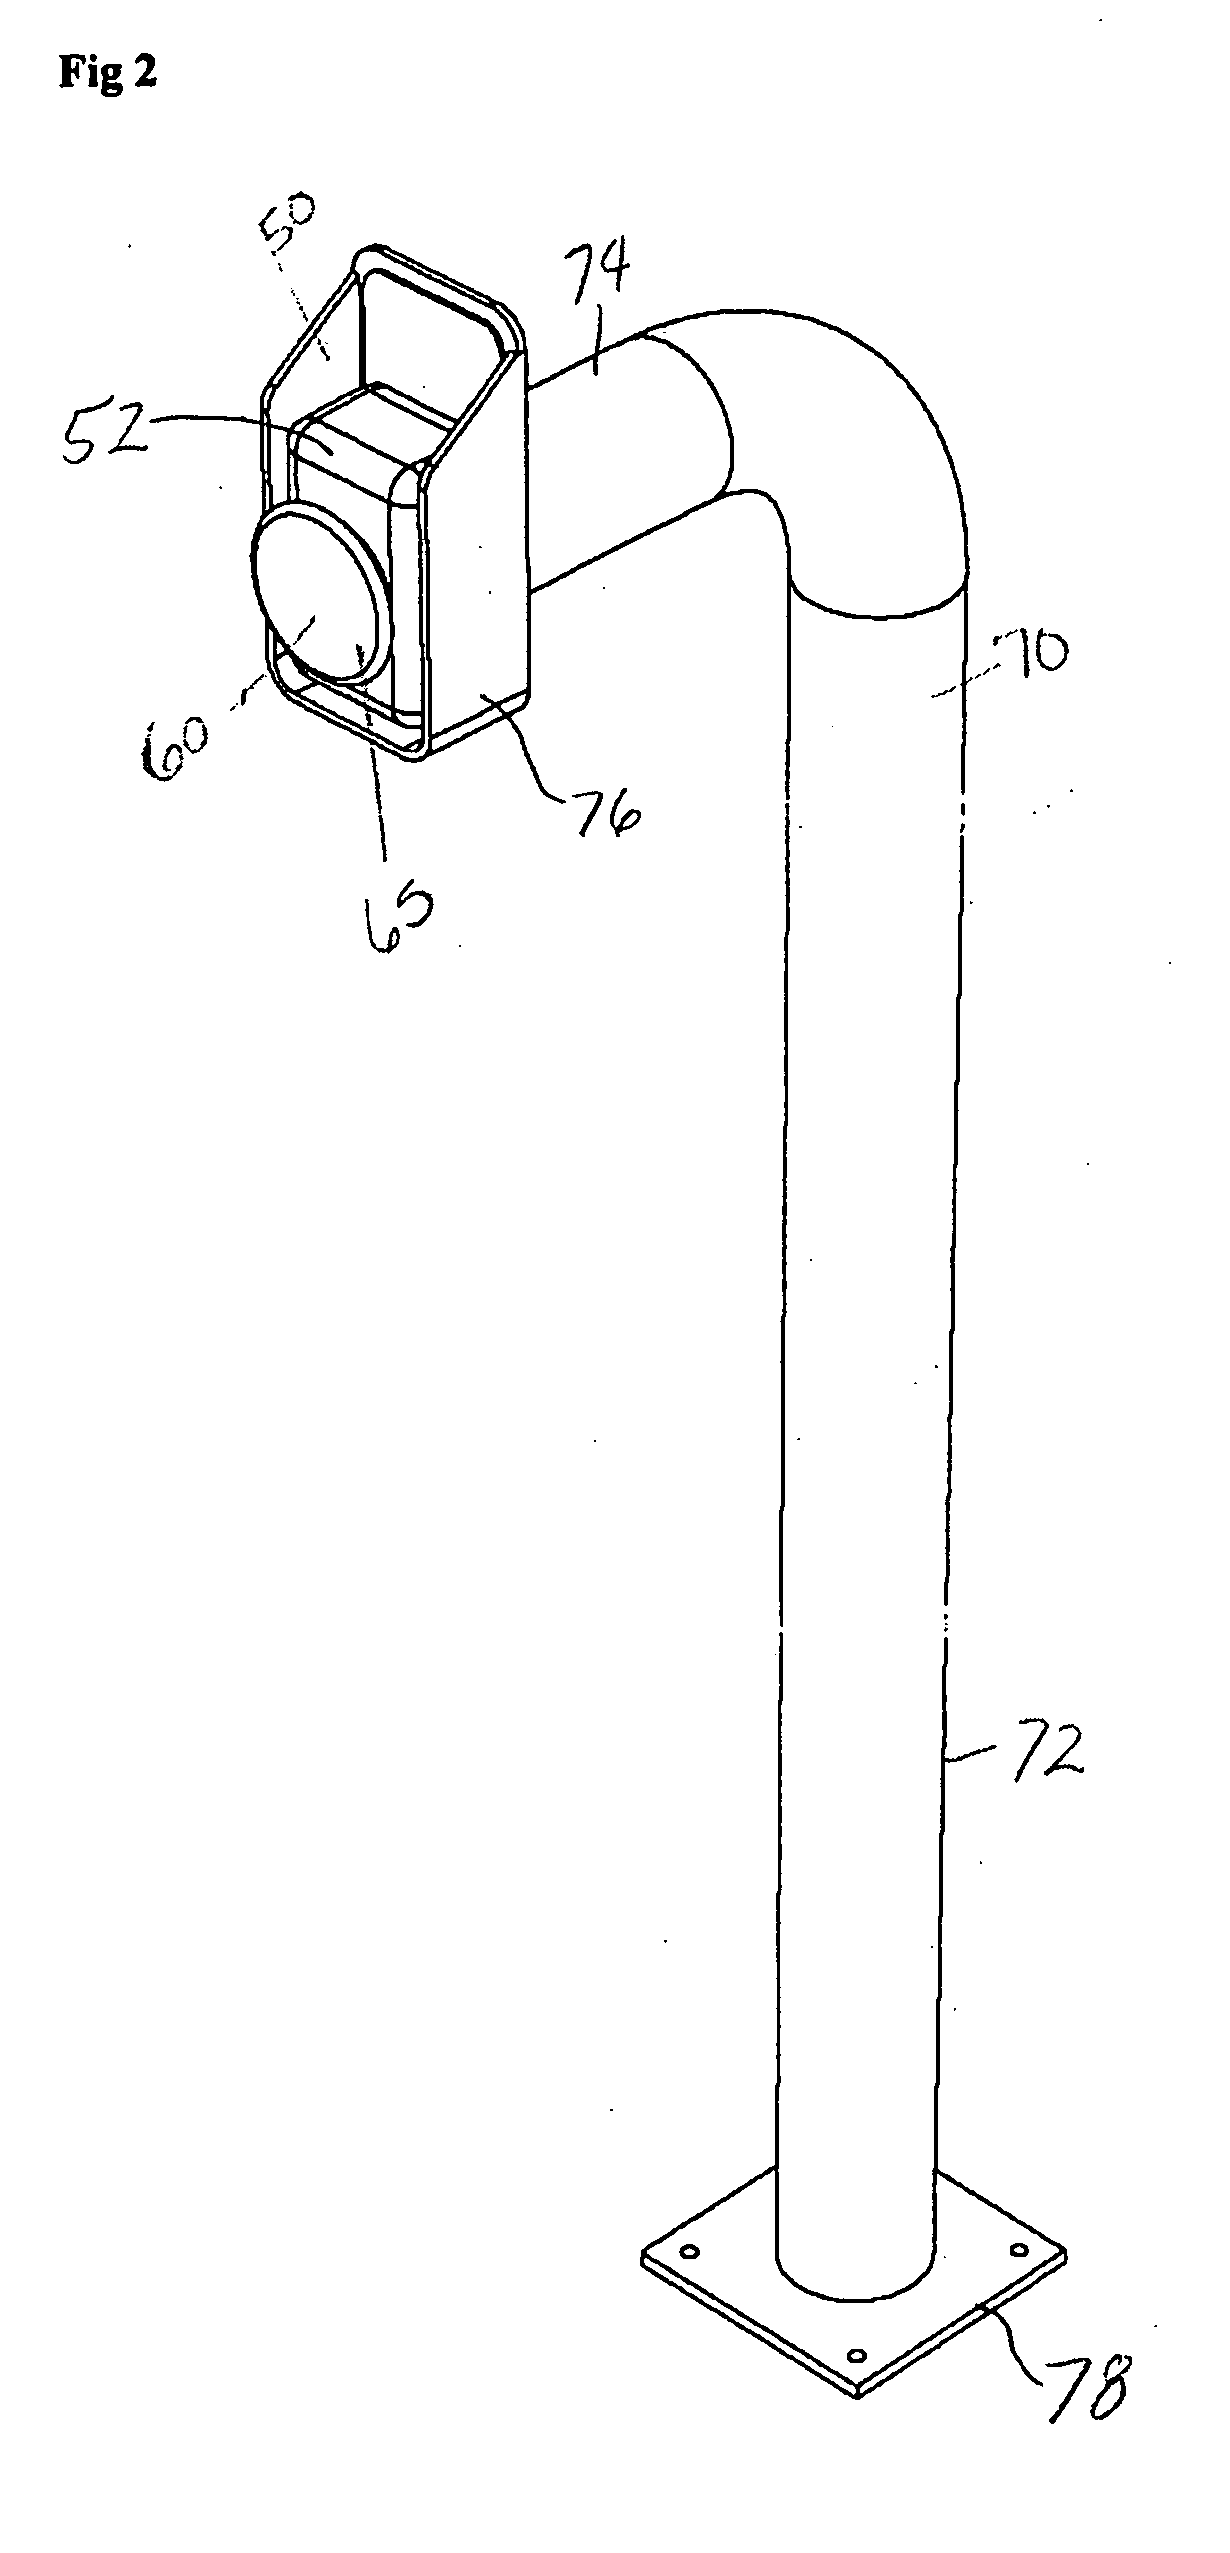 Method and apparatus for deaf and hard of hearing access to drive-through facilities